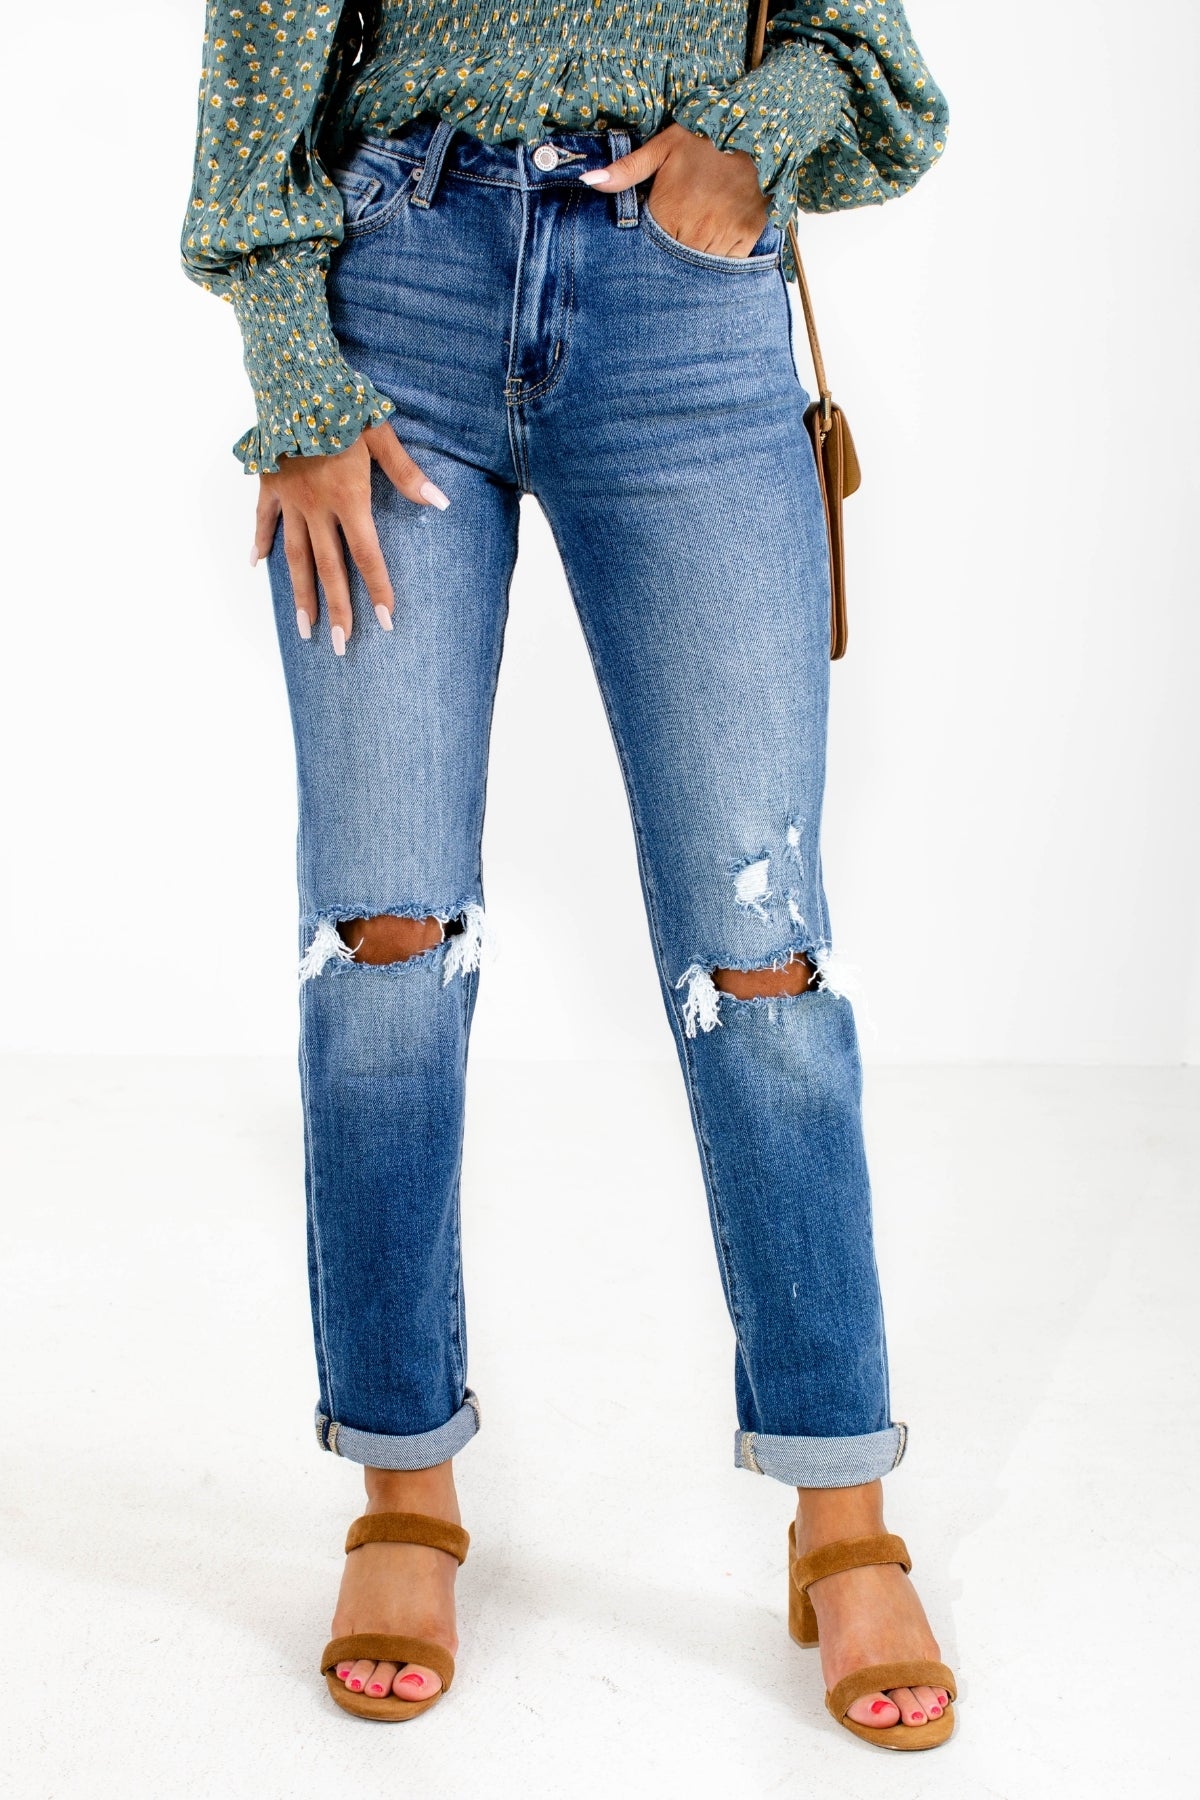 Ripped Mom Jean With Cuffed Hem from Bella Ella Boutique.